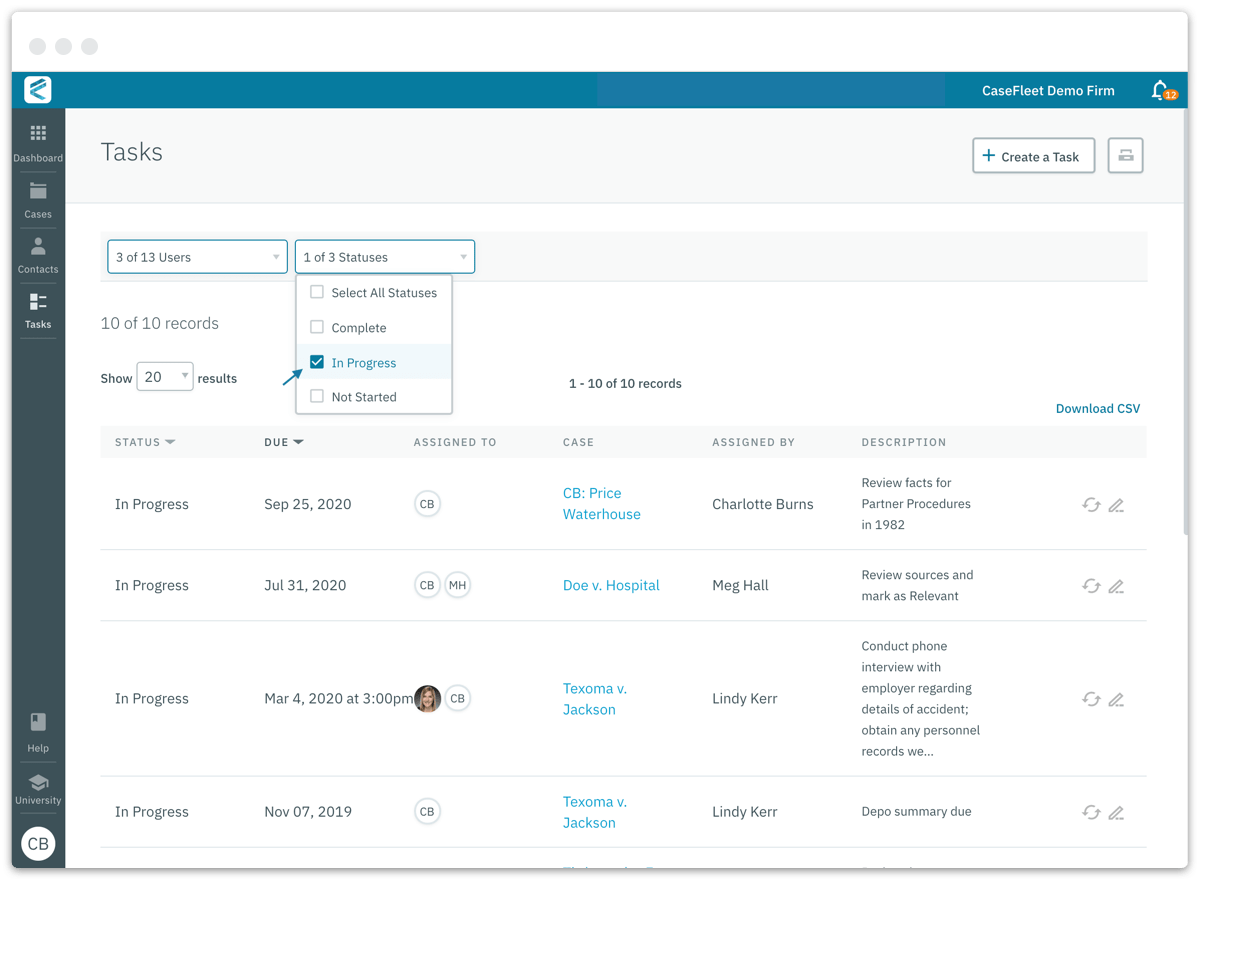 View your list of tasks, and tasks assigned to team members